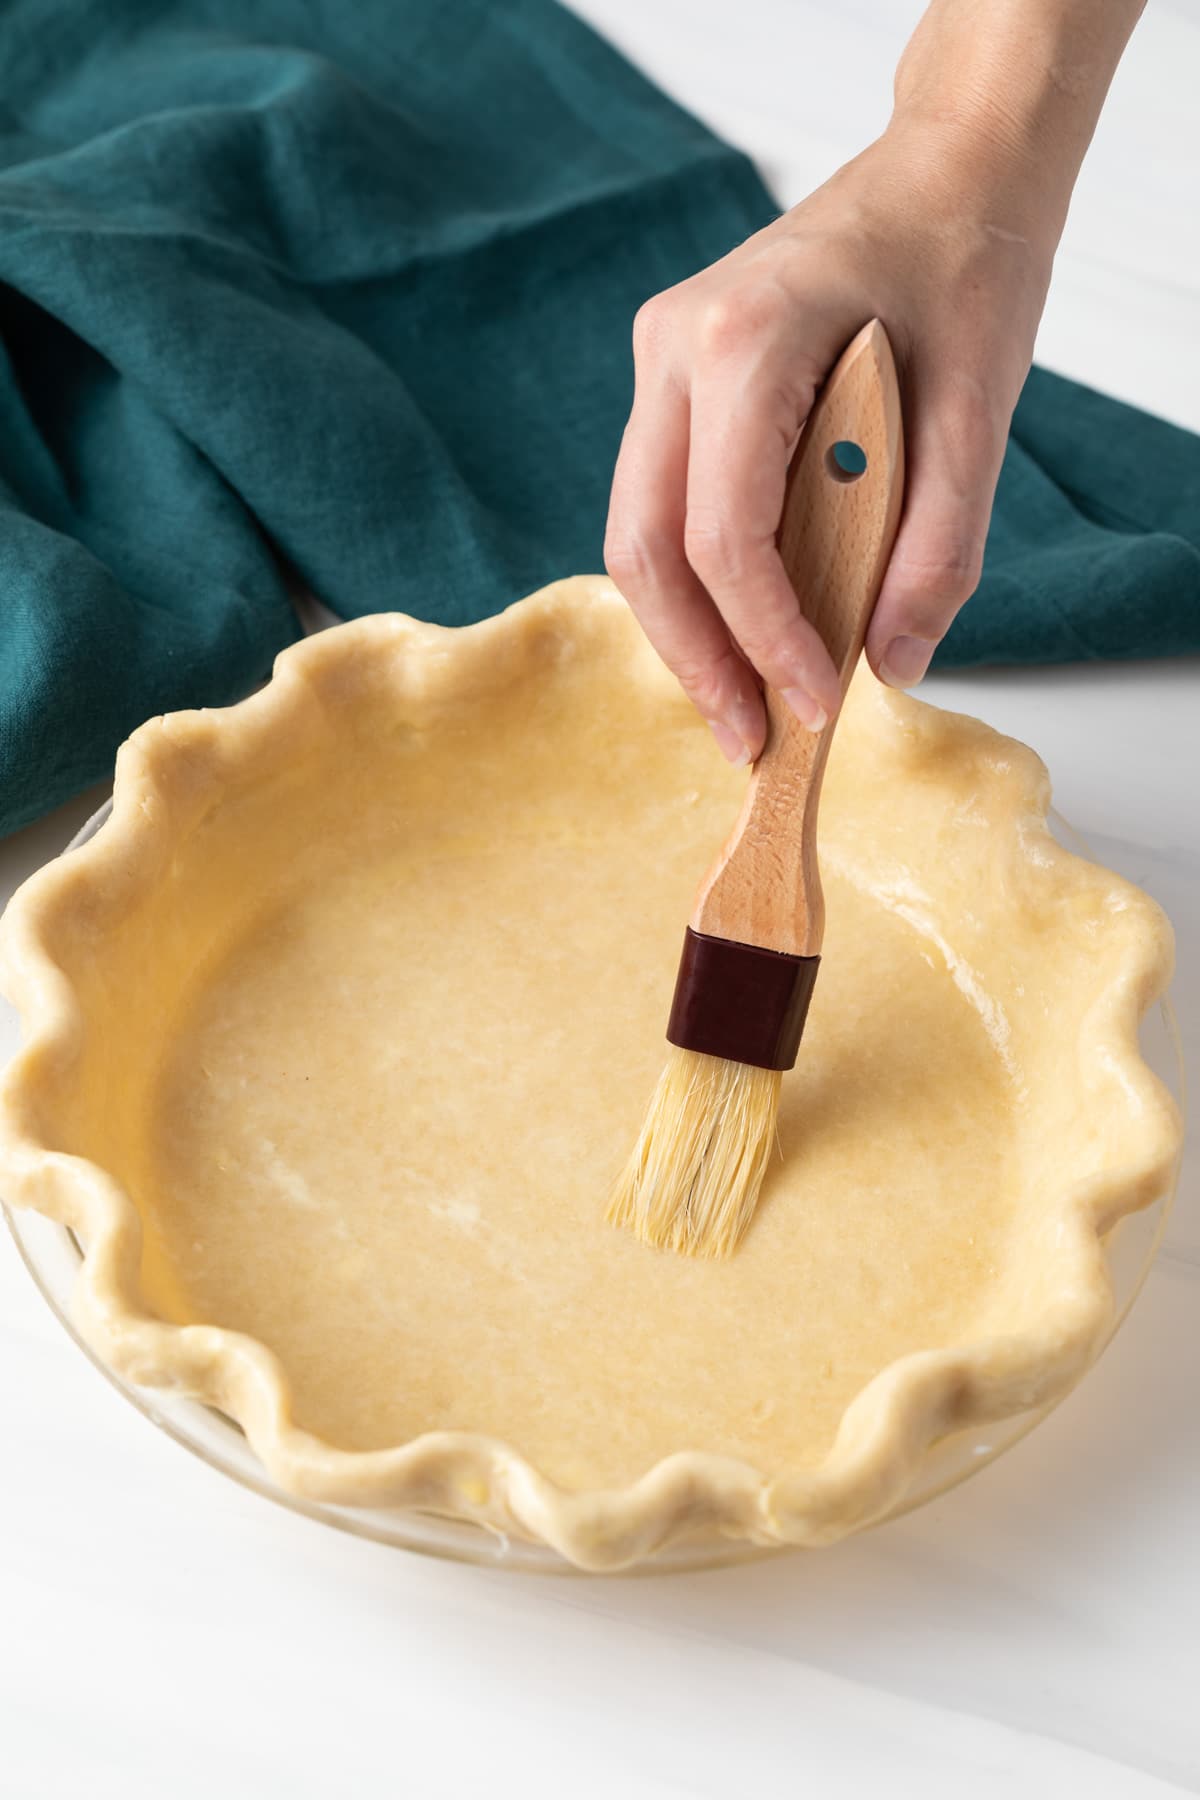 egg wash brushed over pie shell with pastry brush